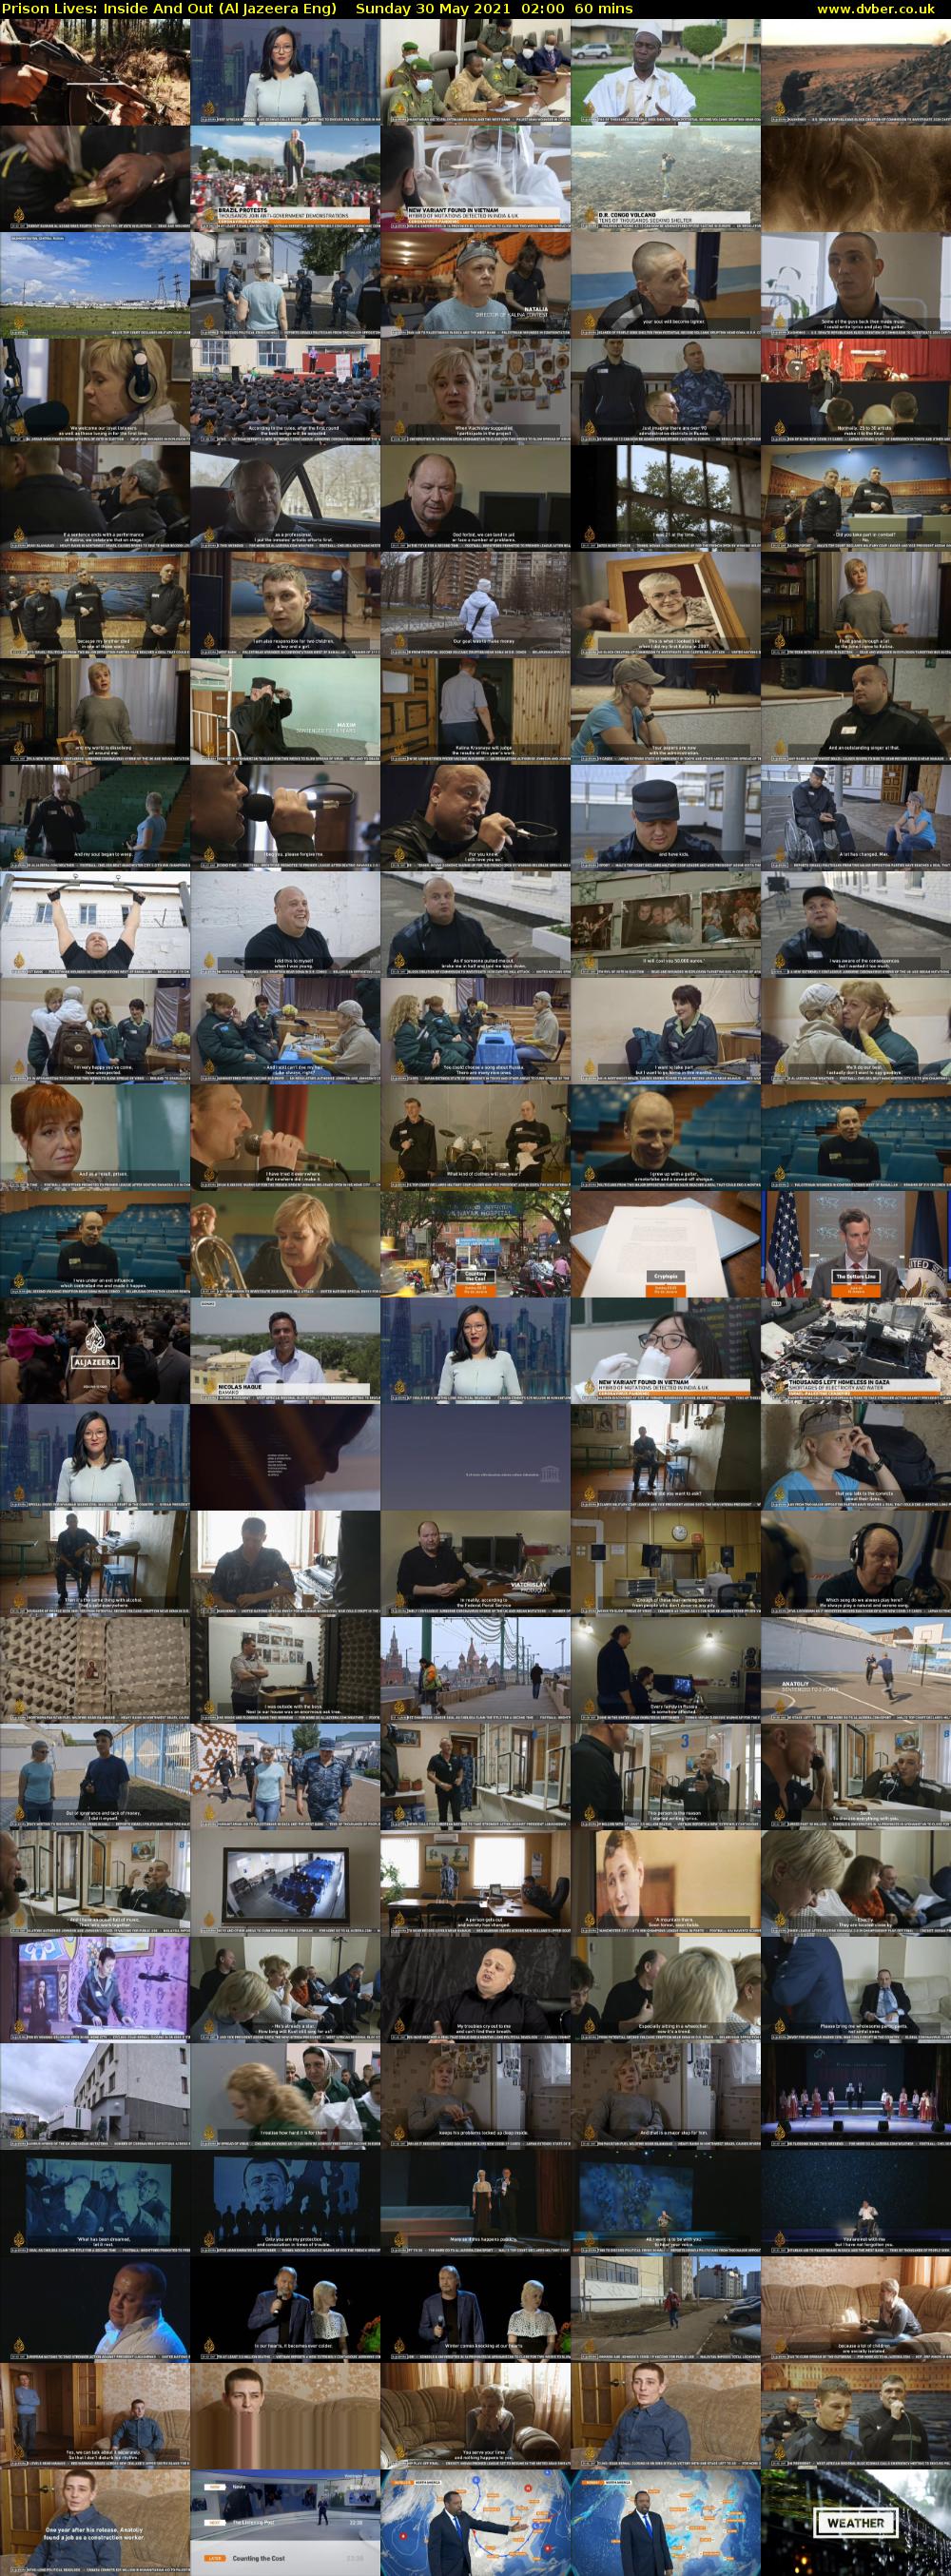 Prison Lives: Inside And Out (Al Jazeera Eng) Sunday 30 May 2021 02:00 - 03:00